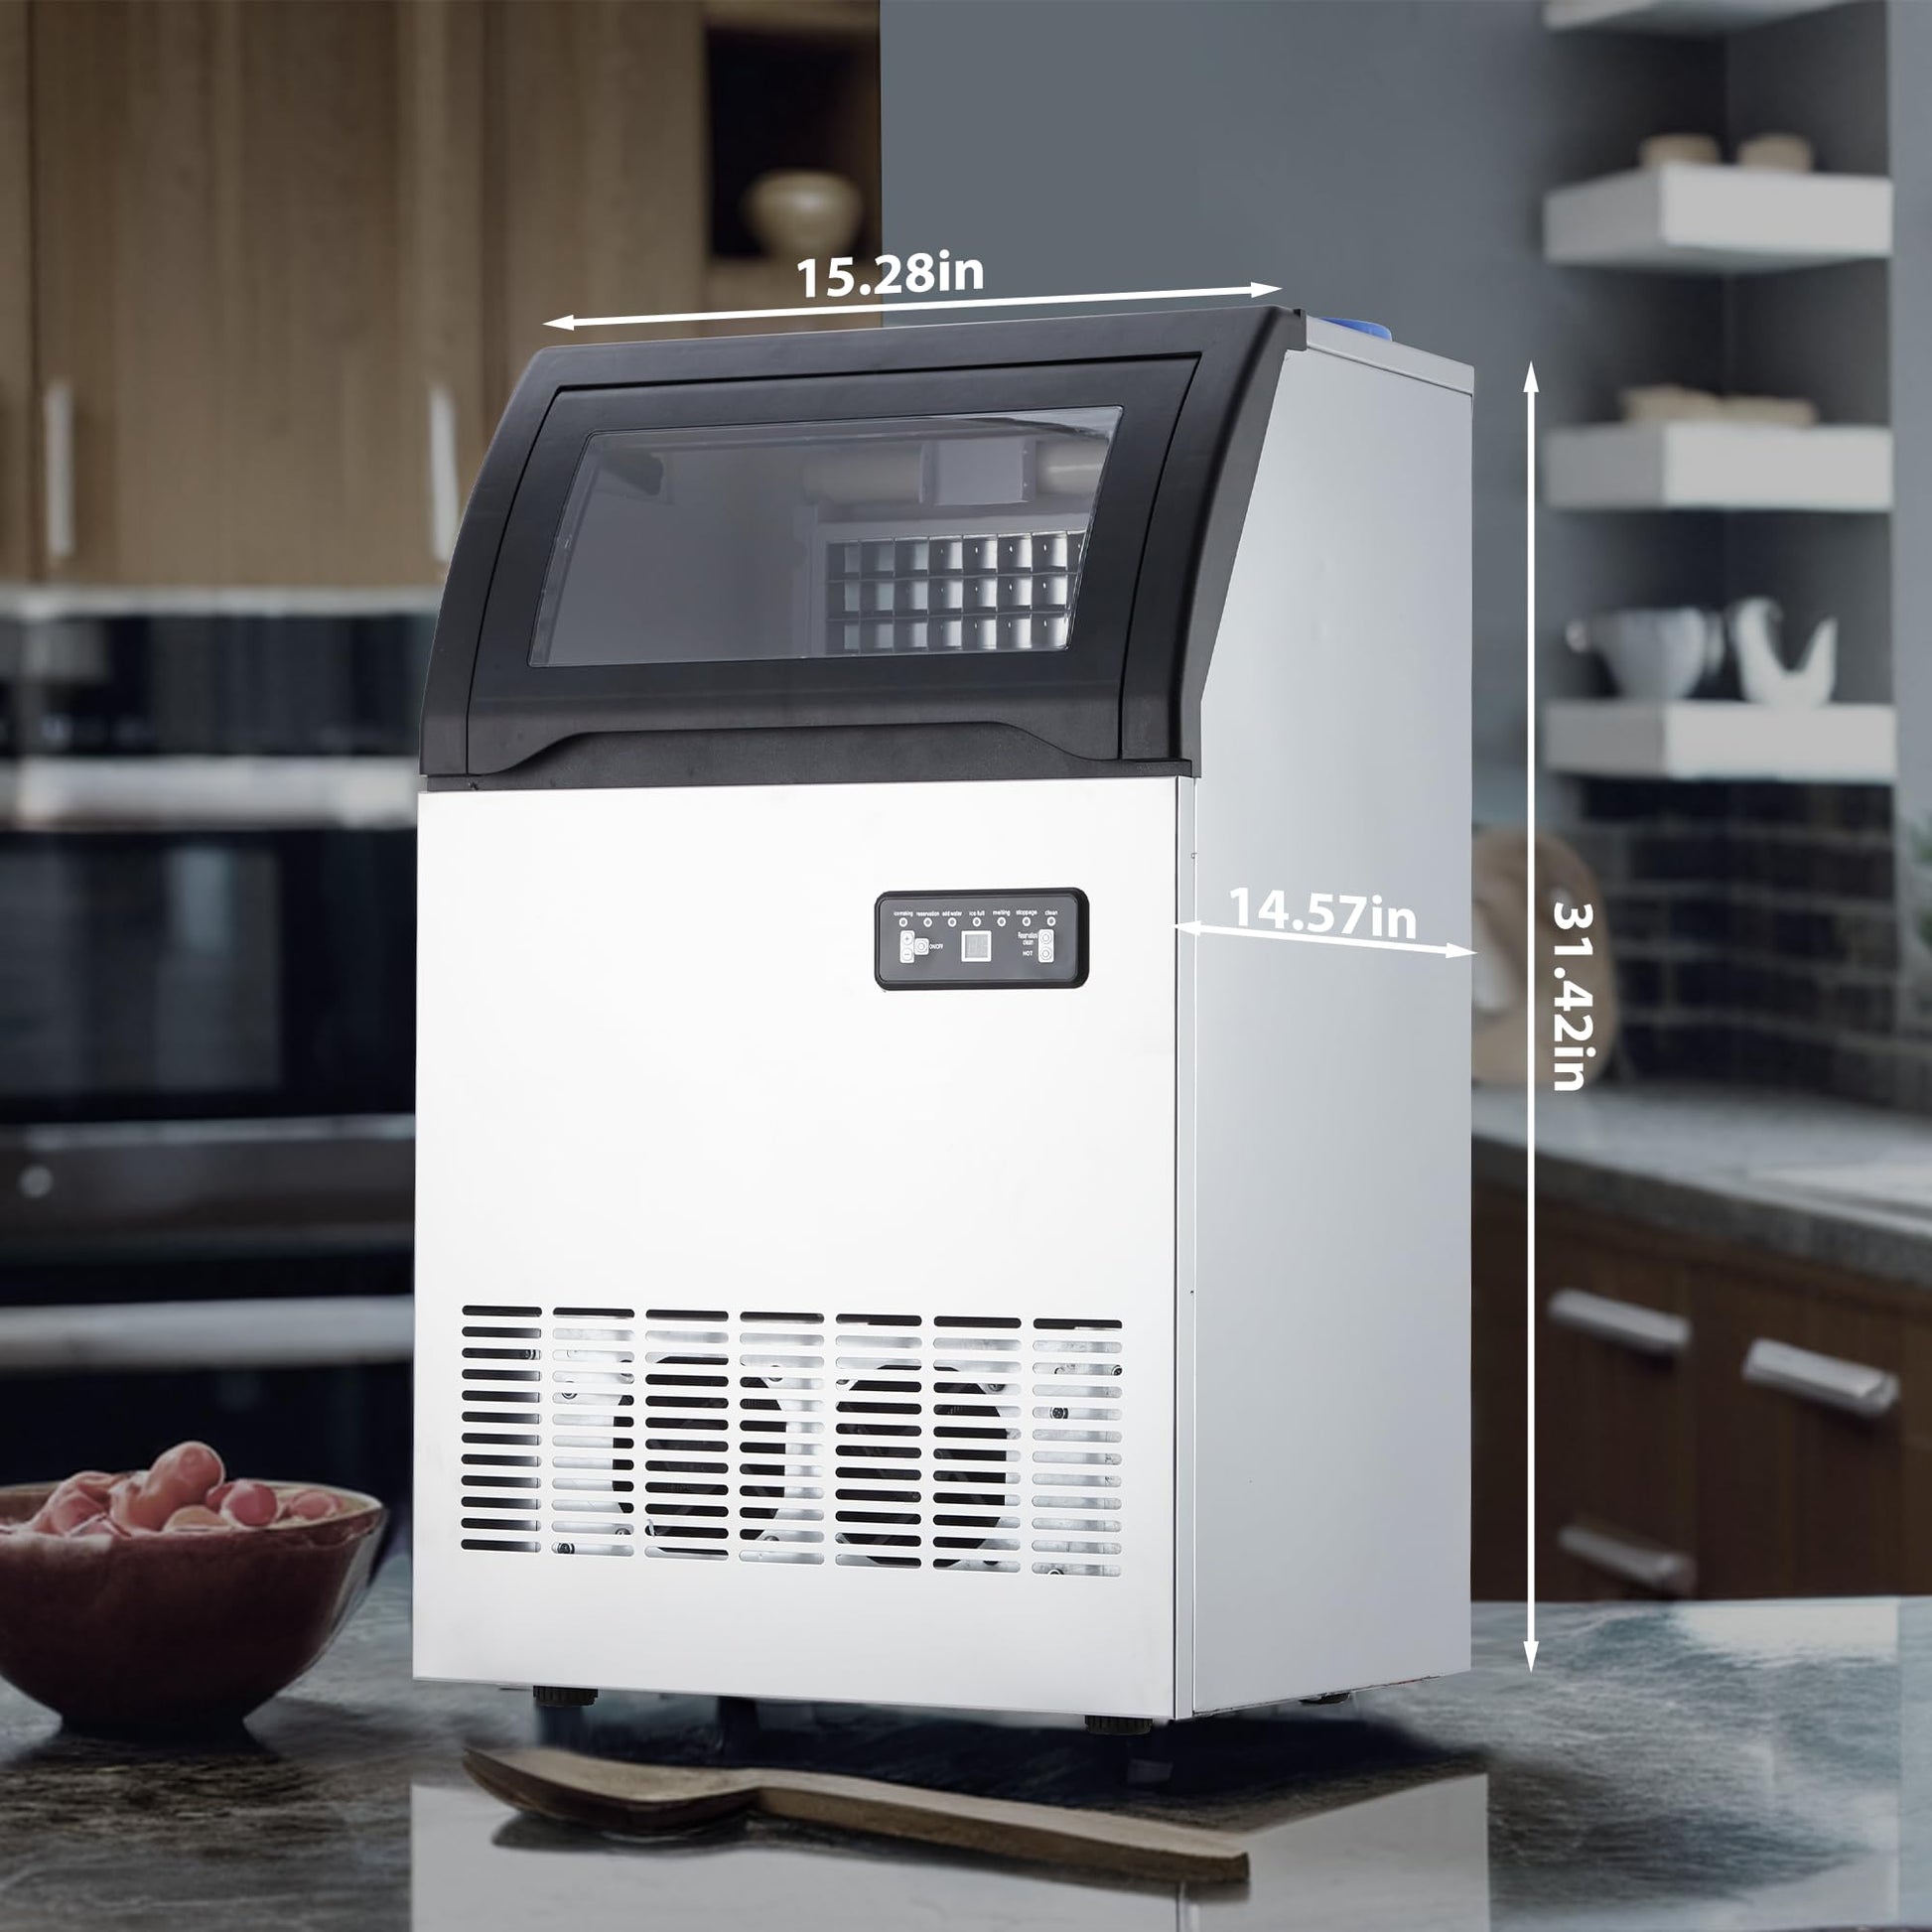 100Lbs/24H Ice Maker, 33Lbs Storage, 45 Cubes in 11-20Mins